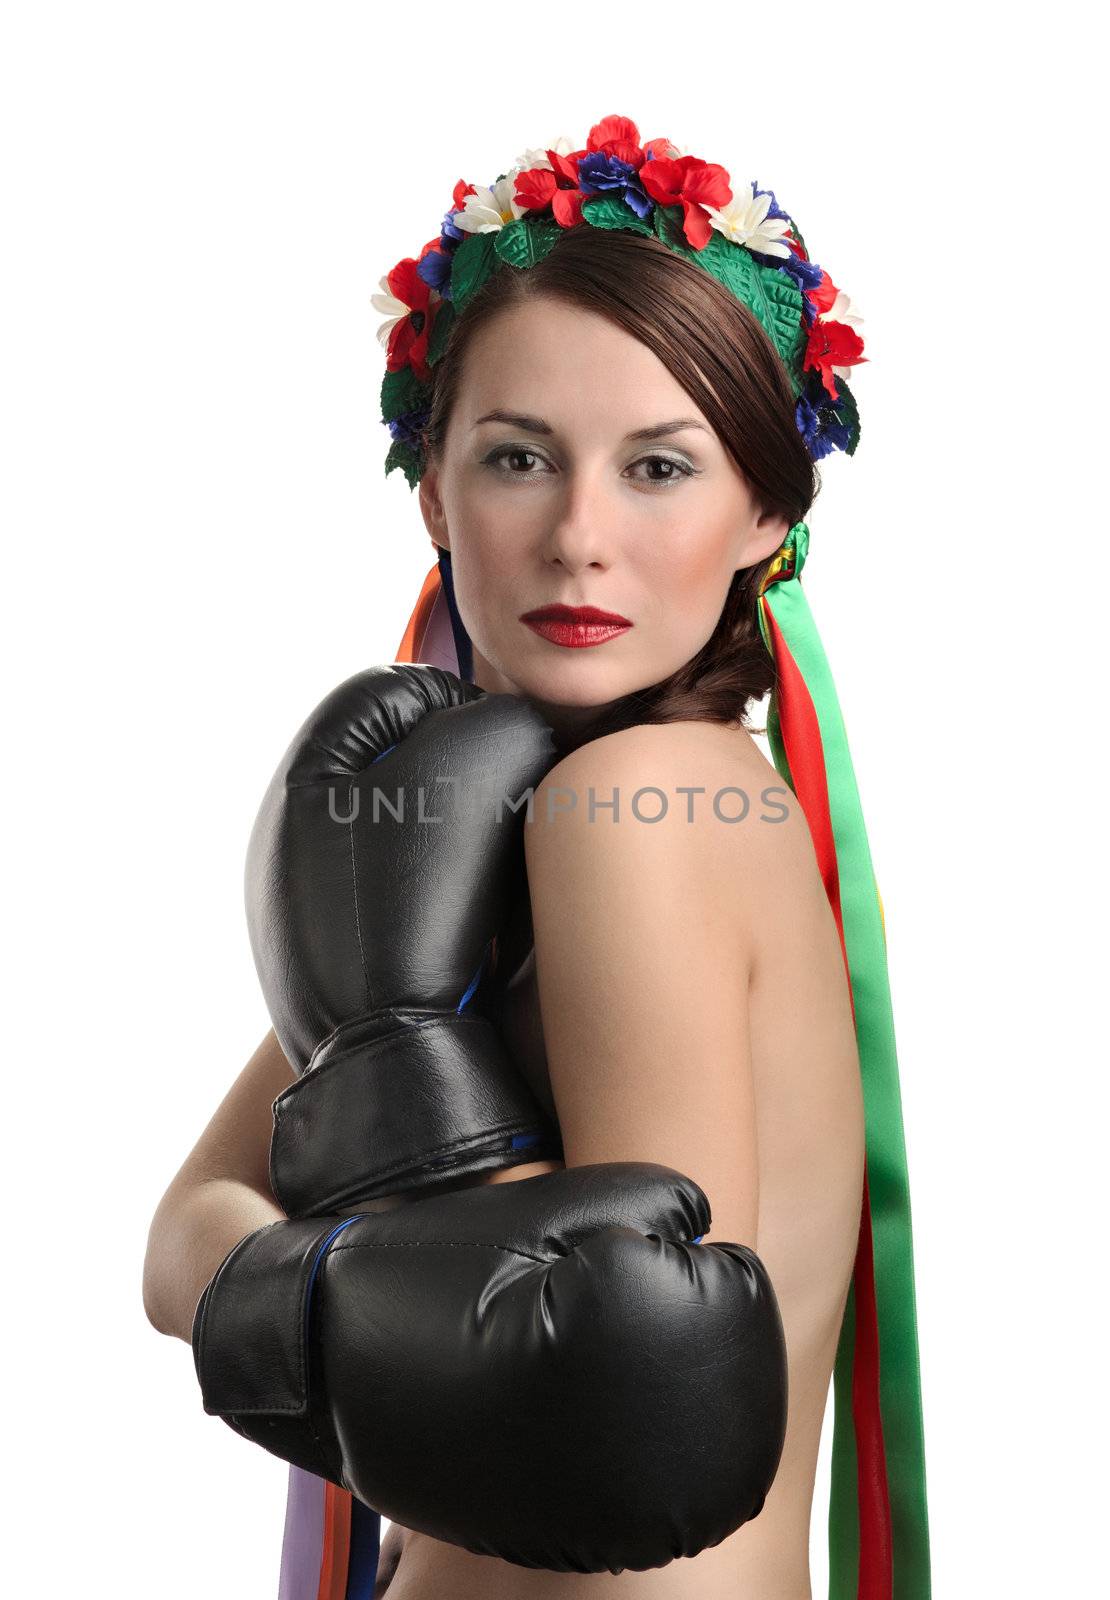 Topless girl with boxing gloves by kirs-ua